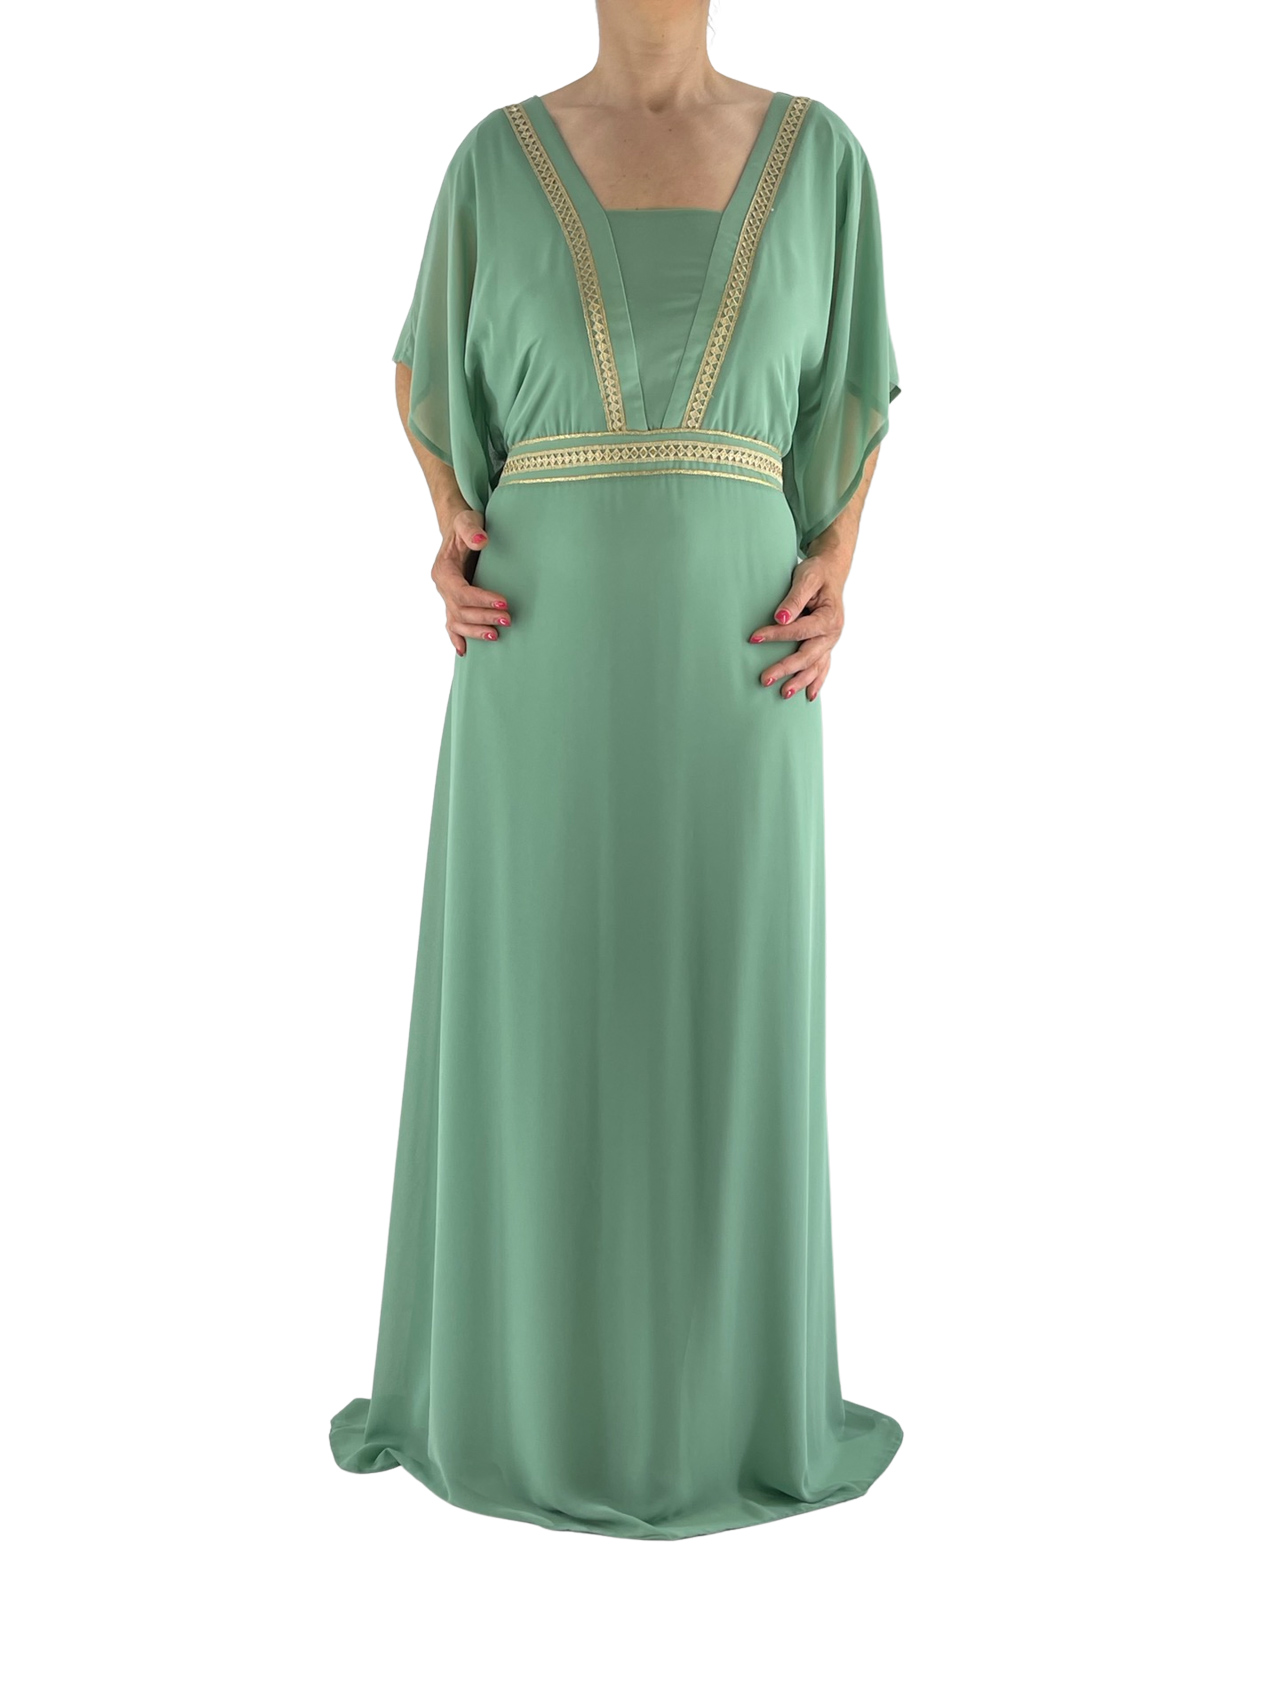 Maxi dress with gold braid code 9399